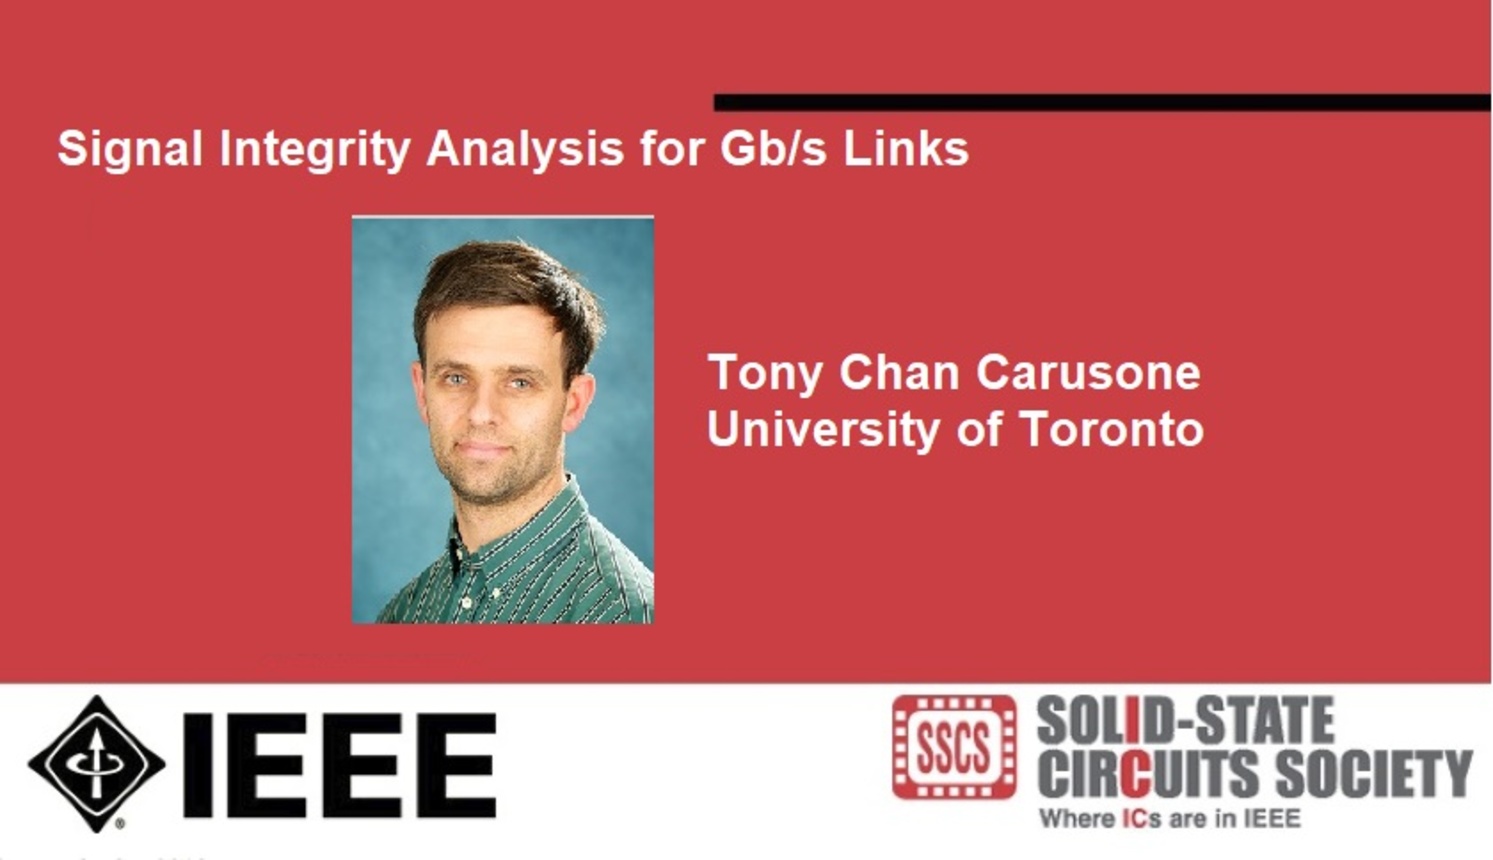 Signal Integrity Analysis for Gbs Links Video